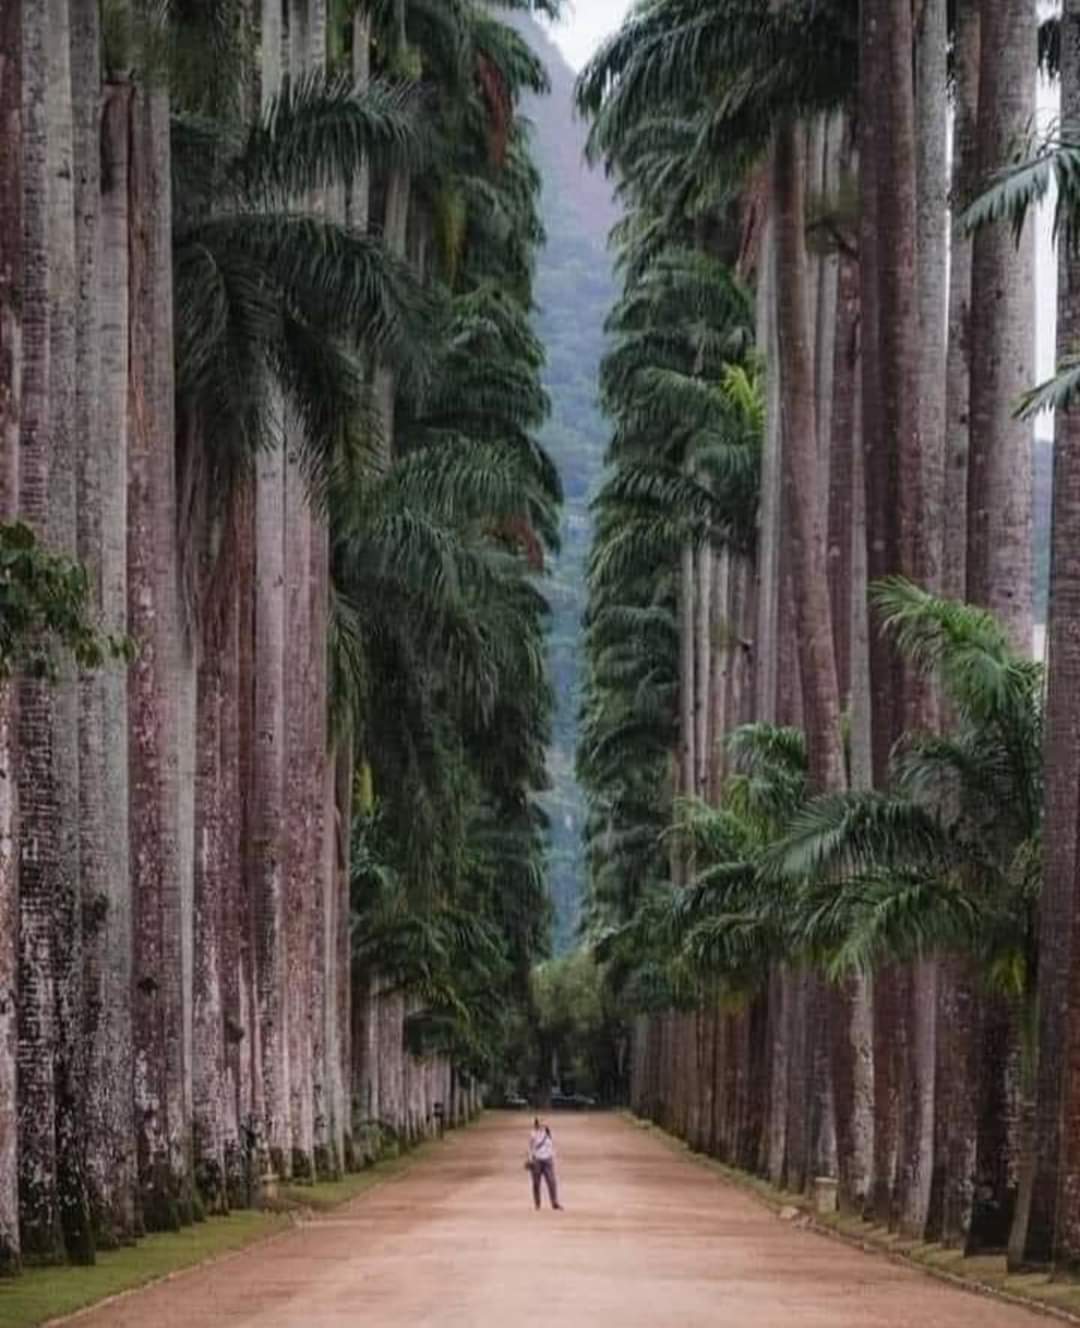 Botanical Park of Rio de Janeiro - Brazil. Founded in 1808, it is considered one of the richest and most important in the world.